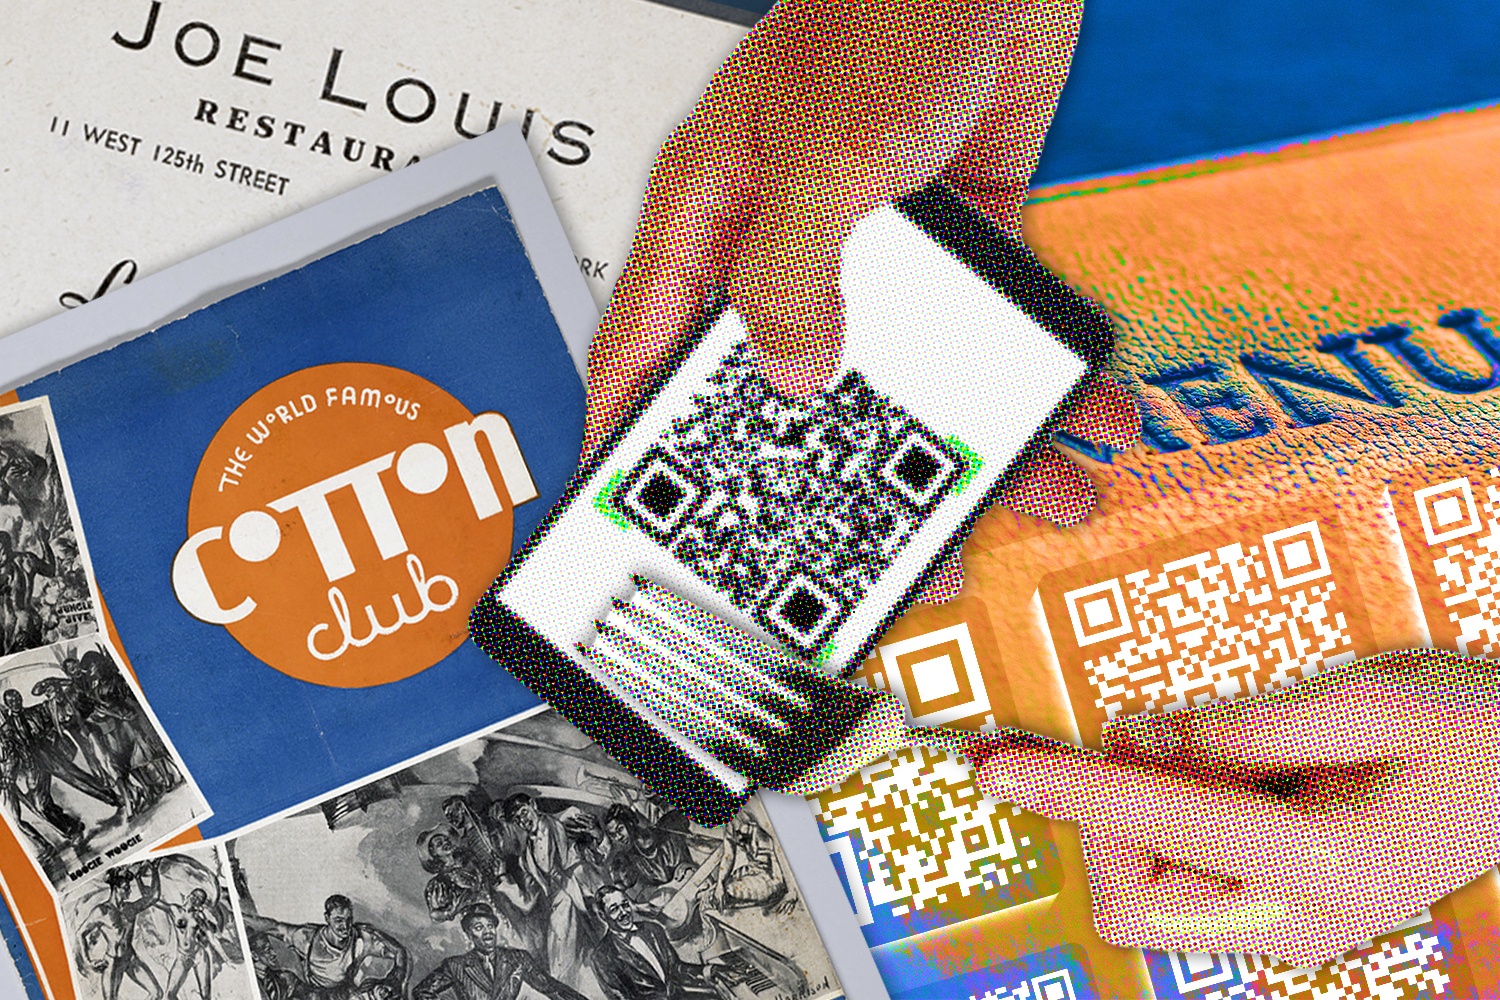 Hard copy menus of The Cotton Club and Joe Louis with graphic of hands holding mobile phone over qr codes. July 2021